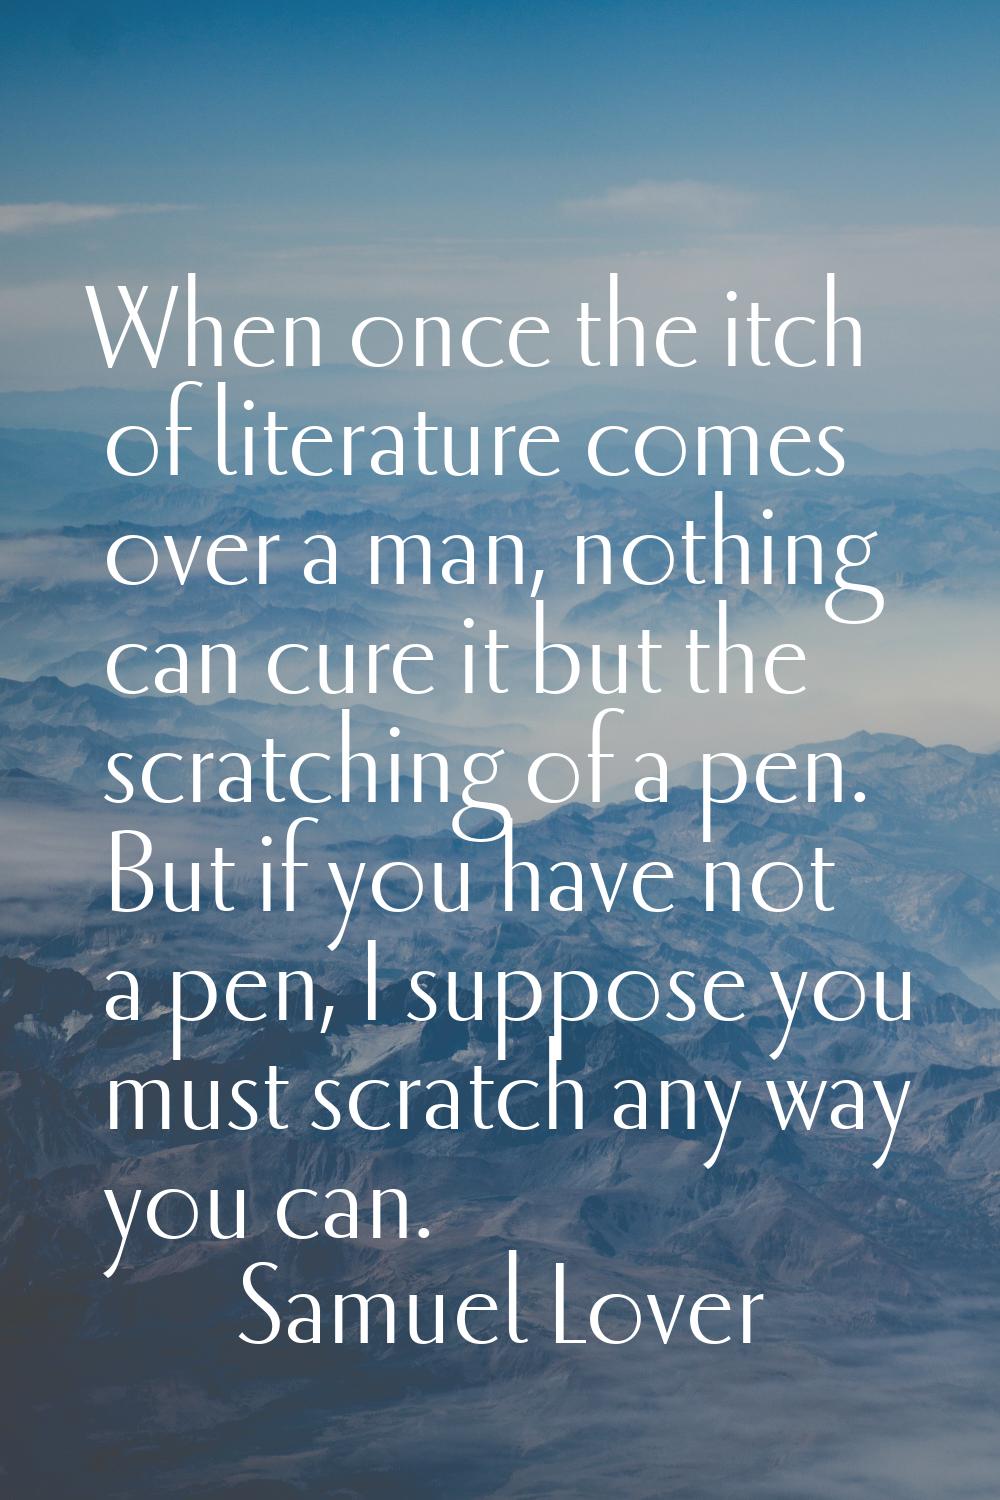 When once the itch of literature comes over a man, nothing can cure it but the scratching of a pen.